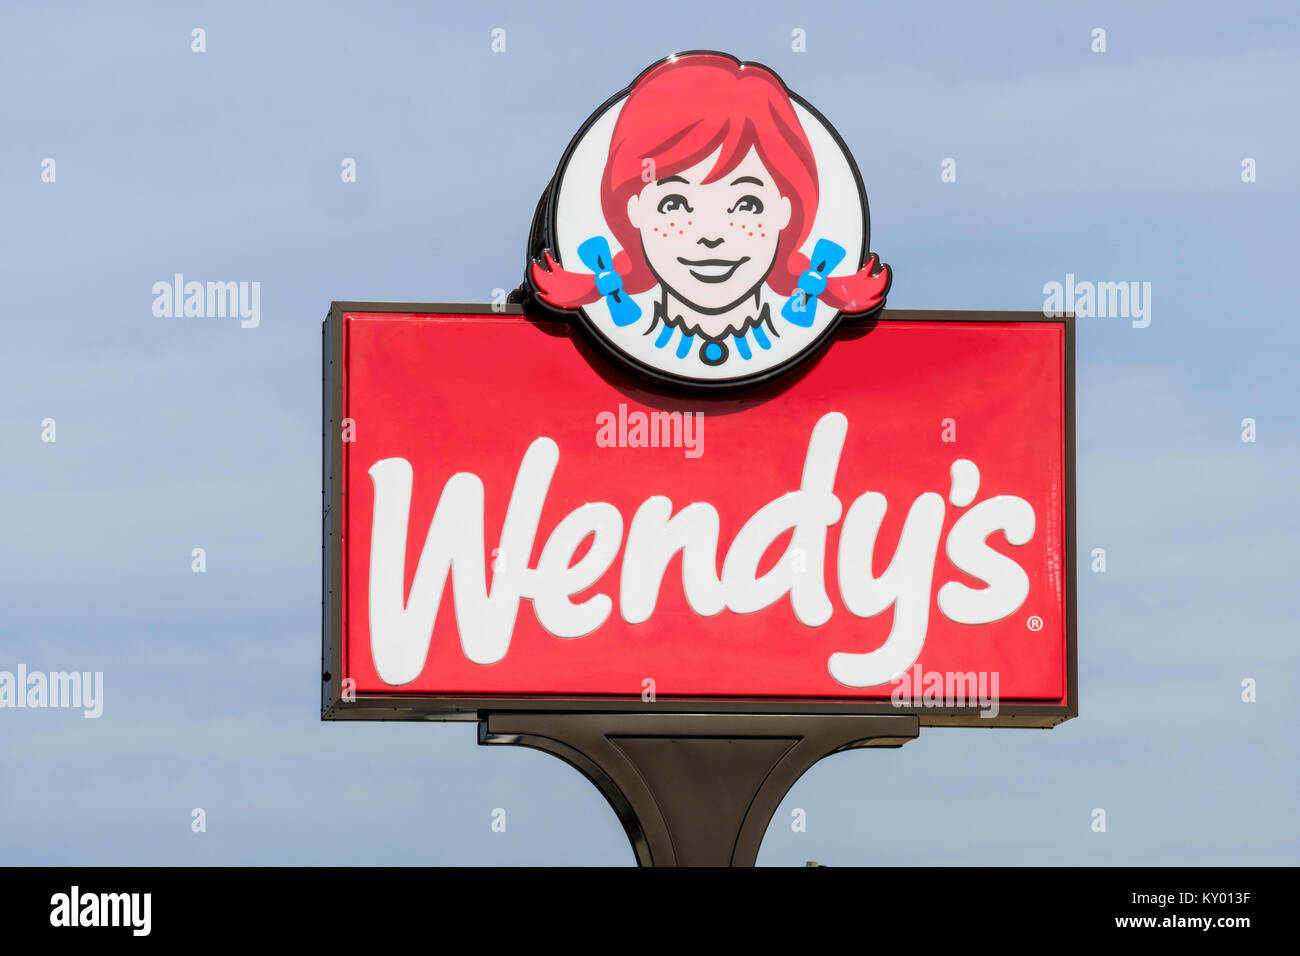 A Wendy's pole sign advertising Wendy's restaurant, a fast food hamburger joint in Oklahoma City, Oklahoma, USA. Stock Photo